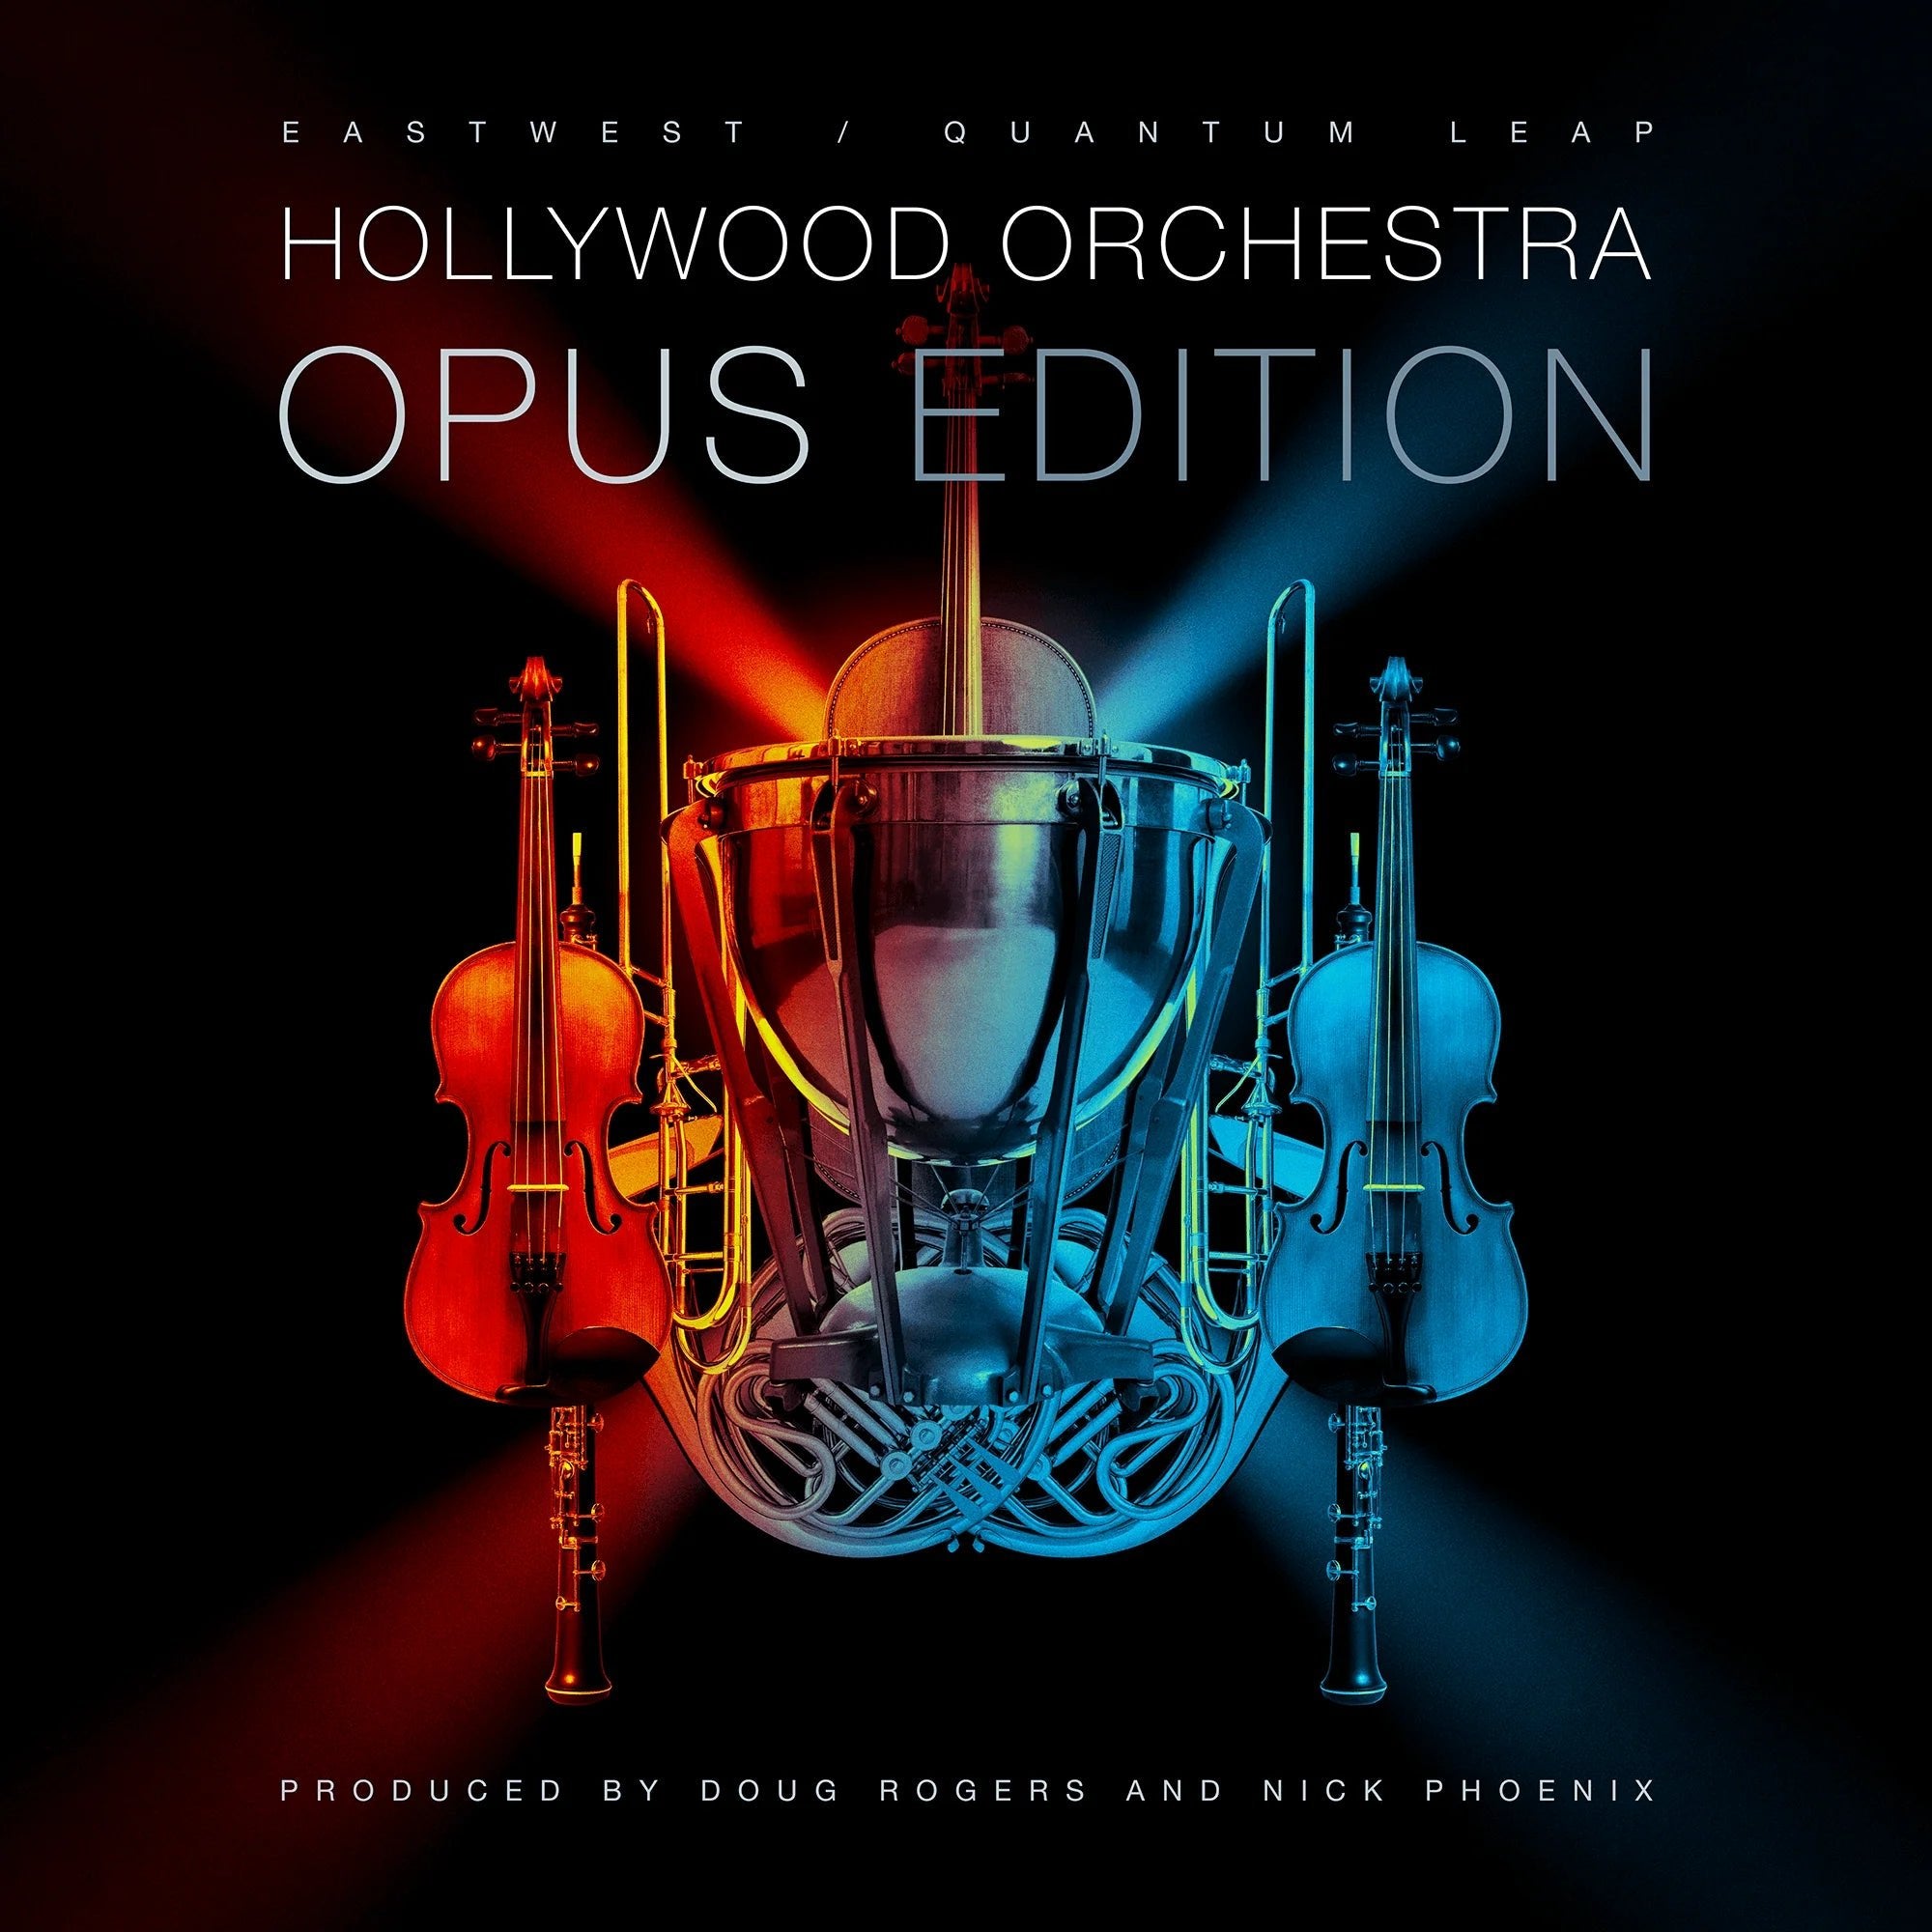 Hollywood Orchestra Opus Edition by EastWest